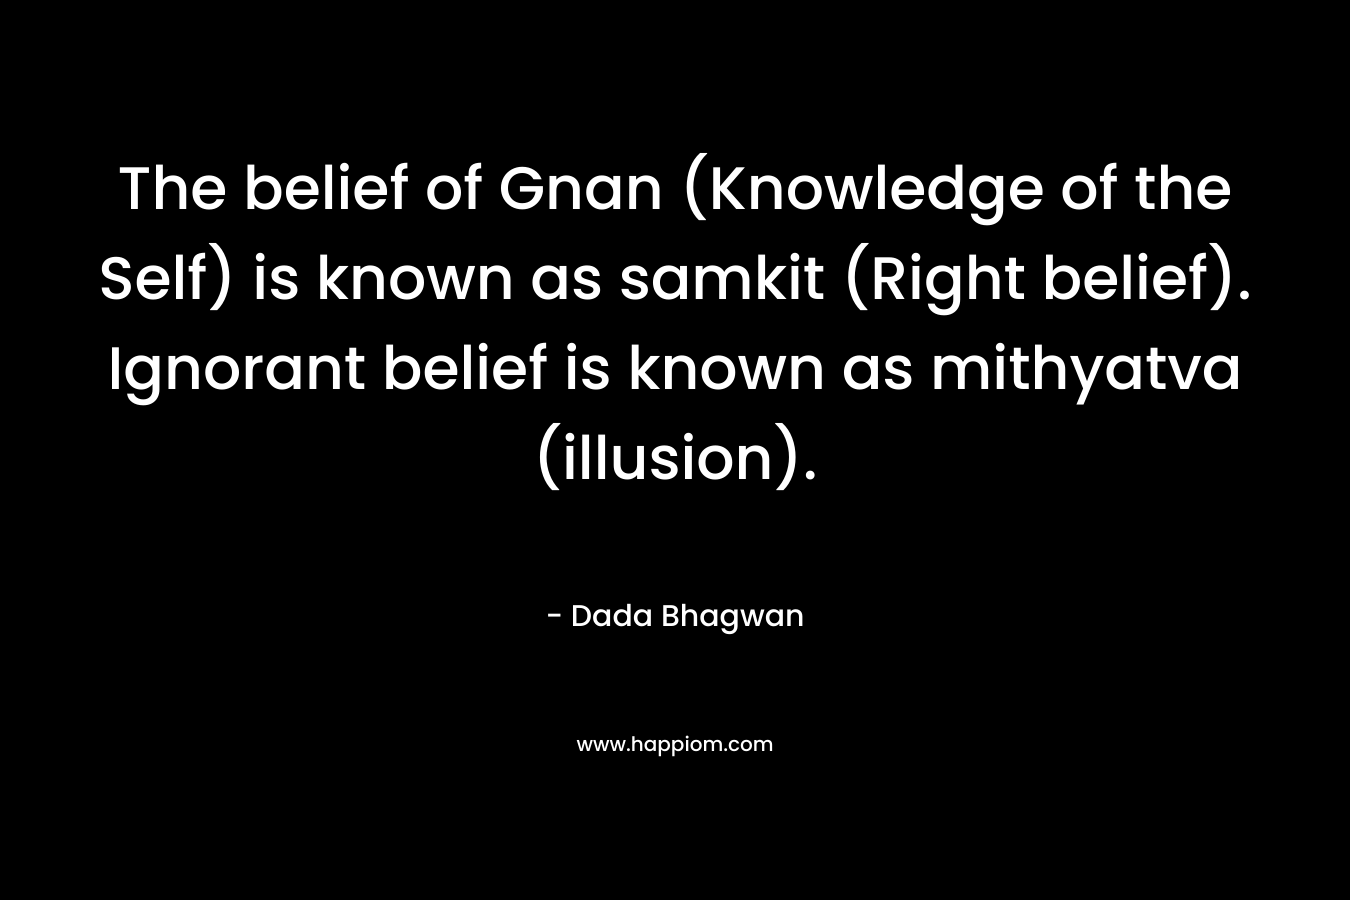 The belief of Gnan (Knowledge of the Self) is known as samkit (Right belief). Ignorant belief is known as mithyatva (illusion).